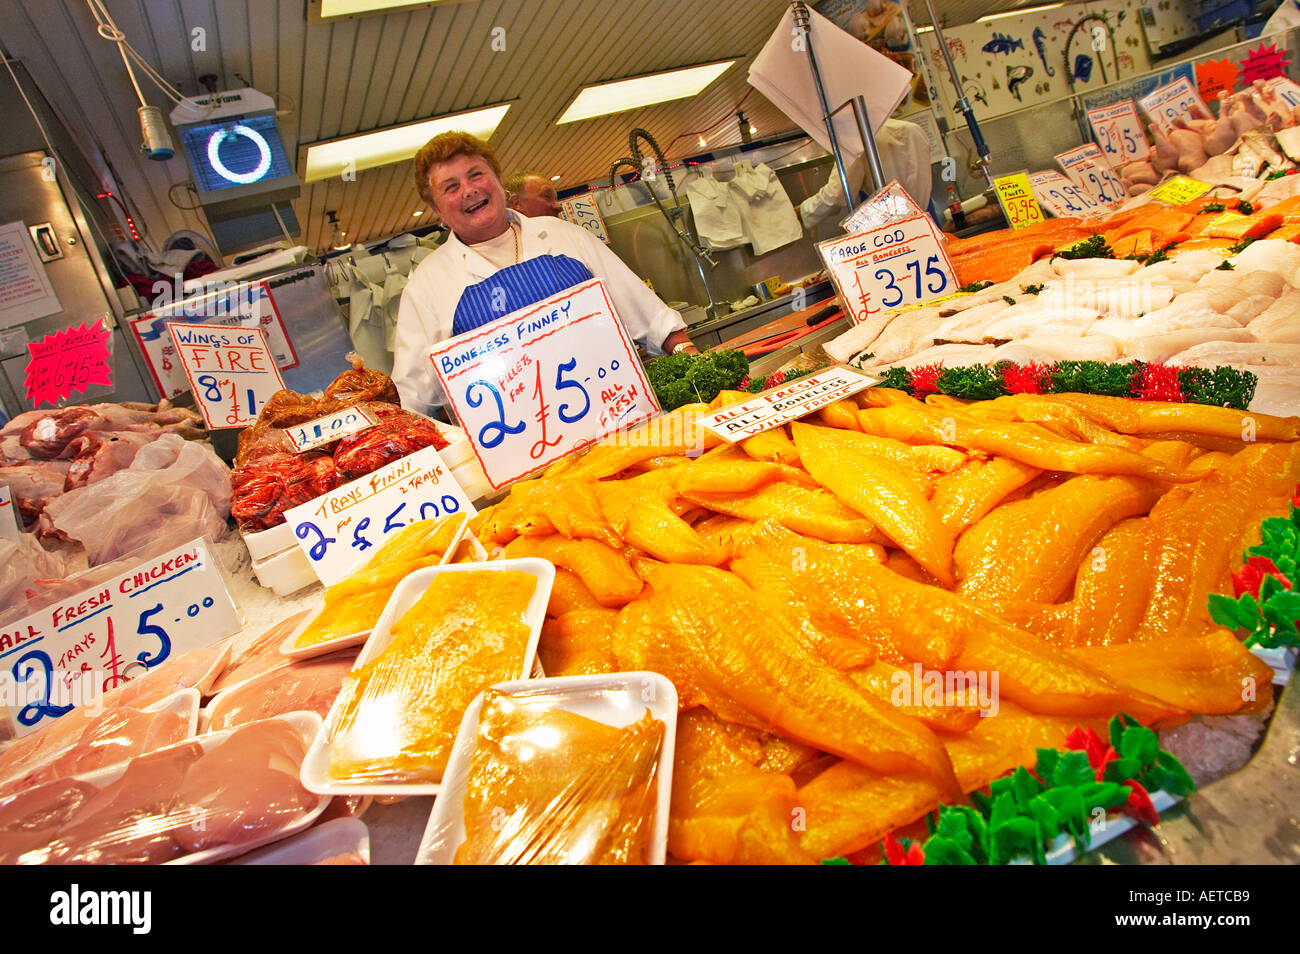 Market stall selling fresh fish in Doncaster, UK Stock Photo